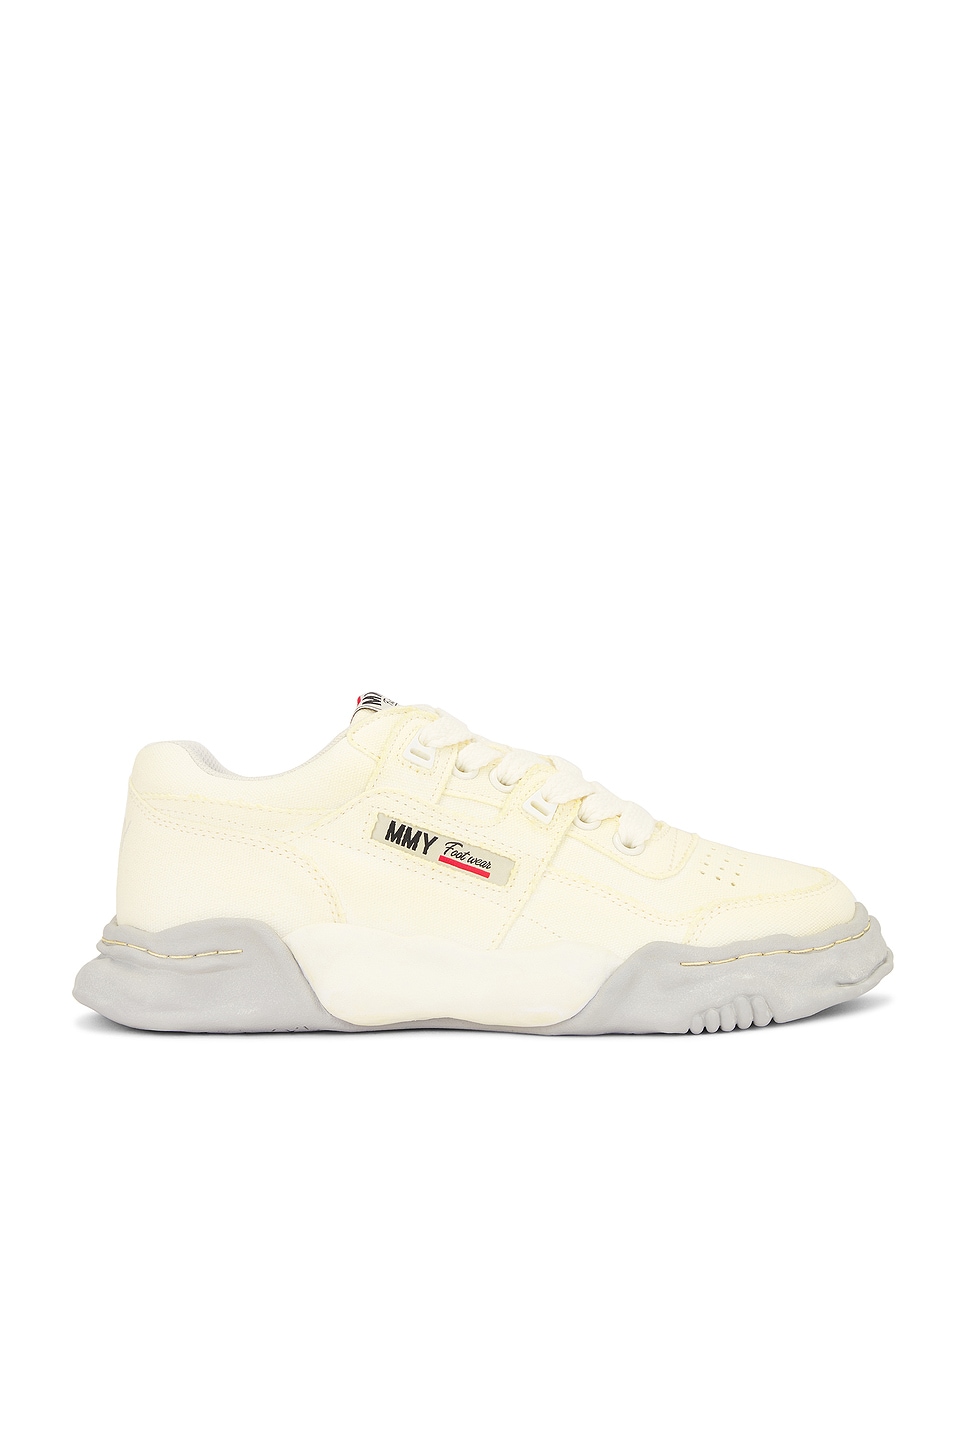 Image 1 of Maison MIHARA YASUHIRO Parker Original Sole Canvas Garment Dye Low Top Sneakers in White